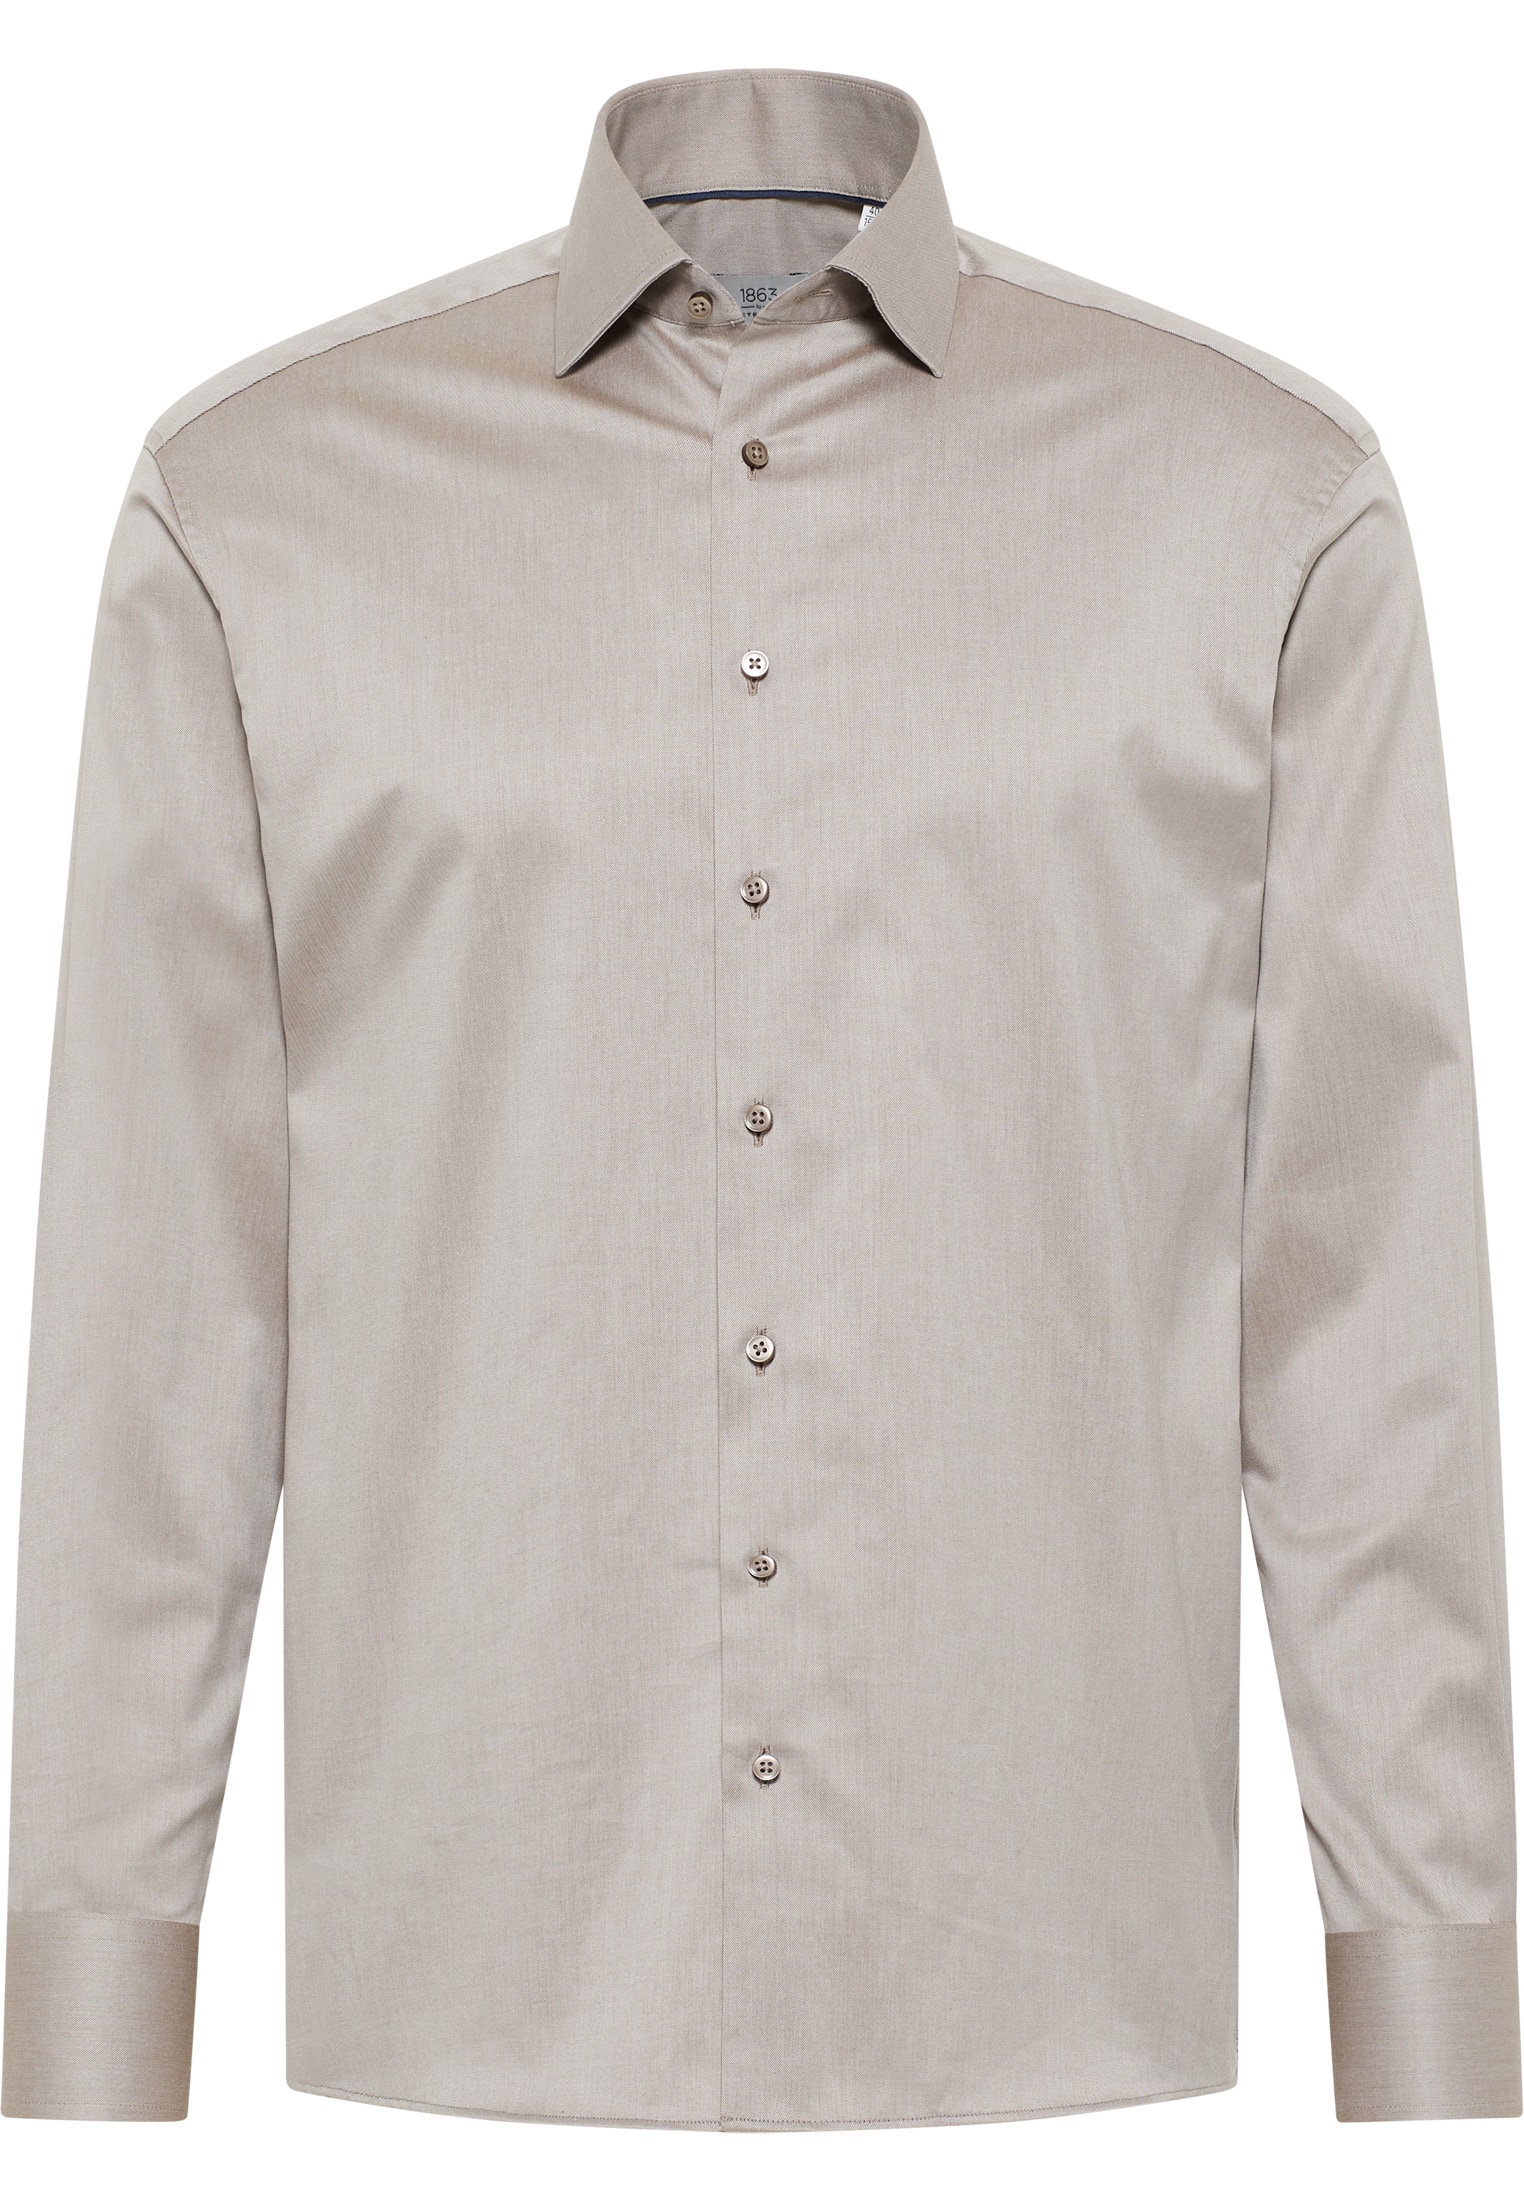 MODERN FIT Luxury Shirt in taupe plain